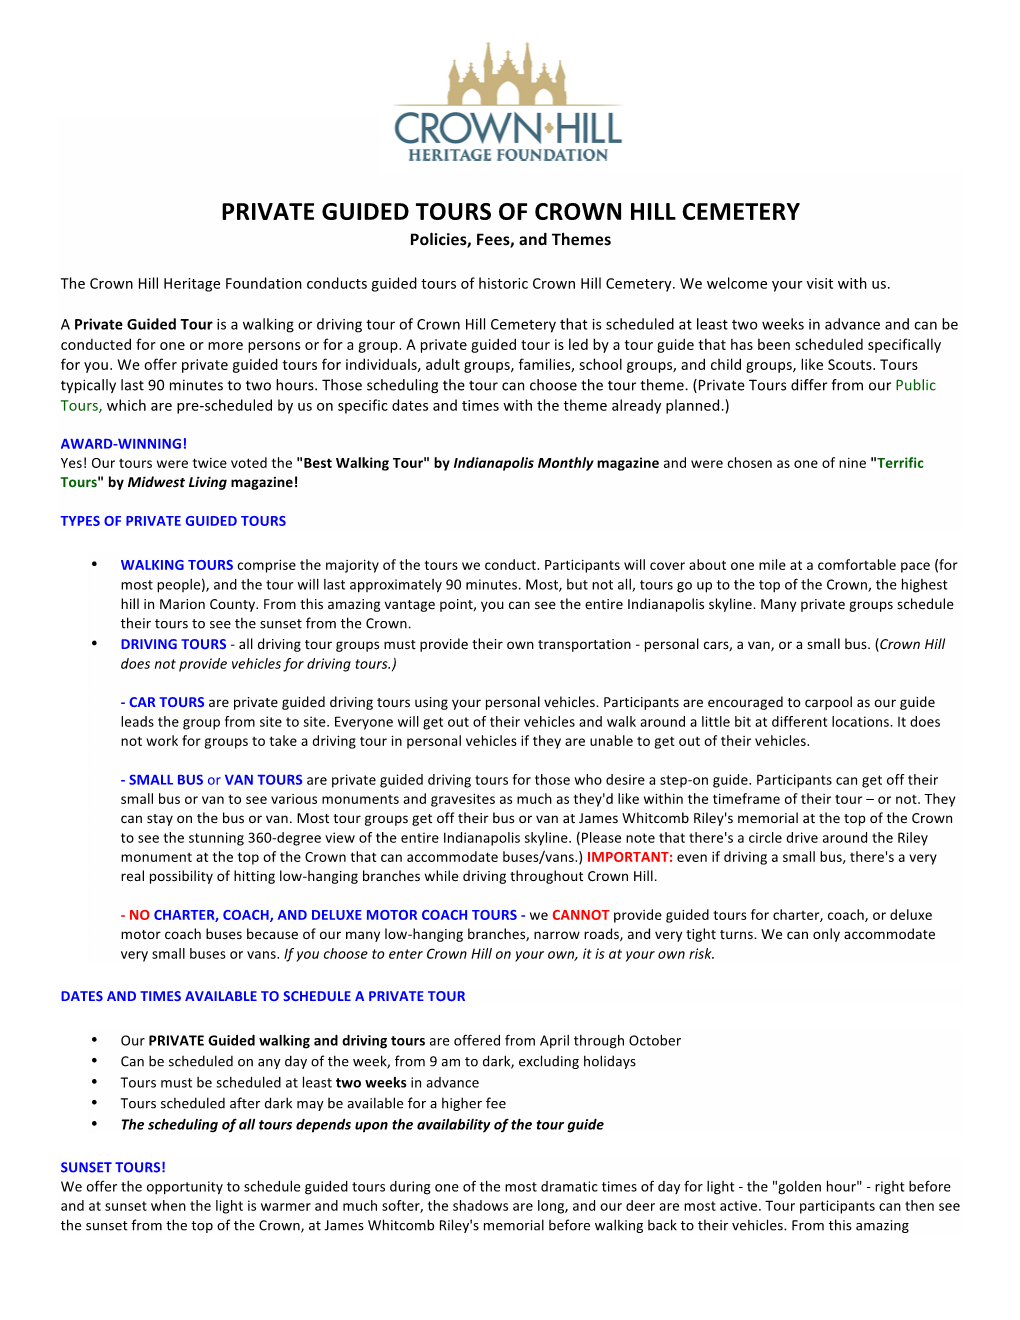 PRIVATE GUIDED TOURS of CROWN HILL CEMETERY Policies, Fees, and Themes